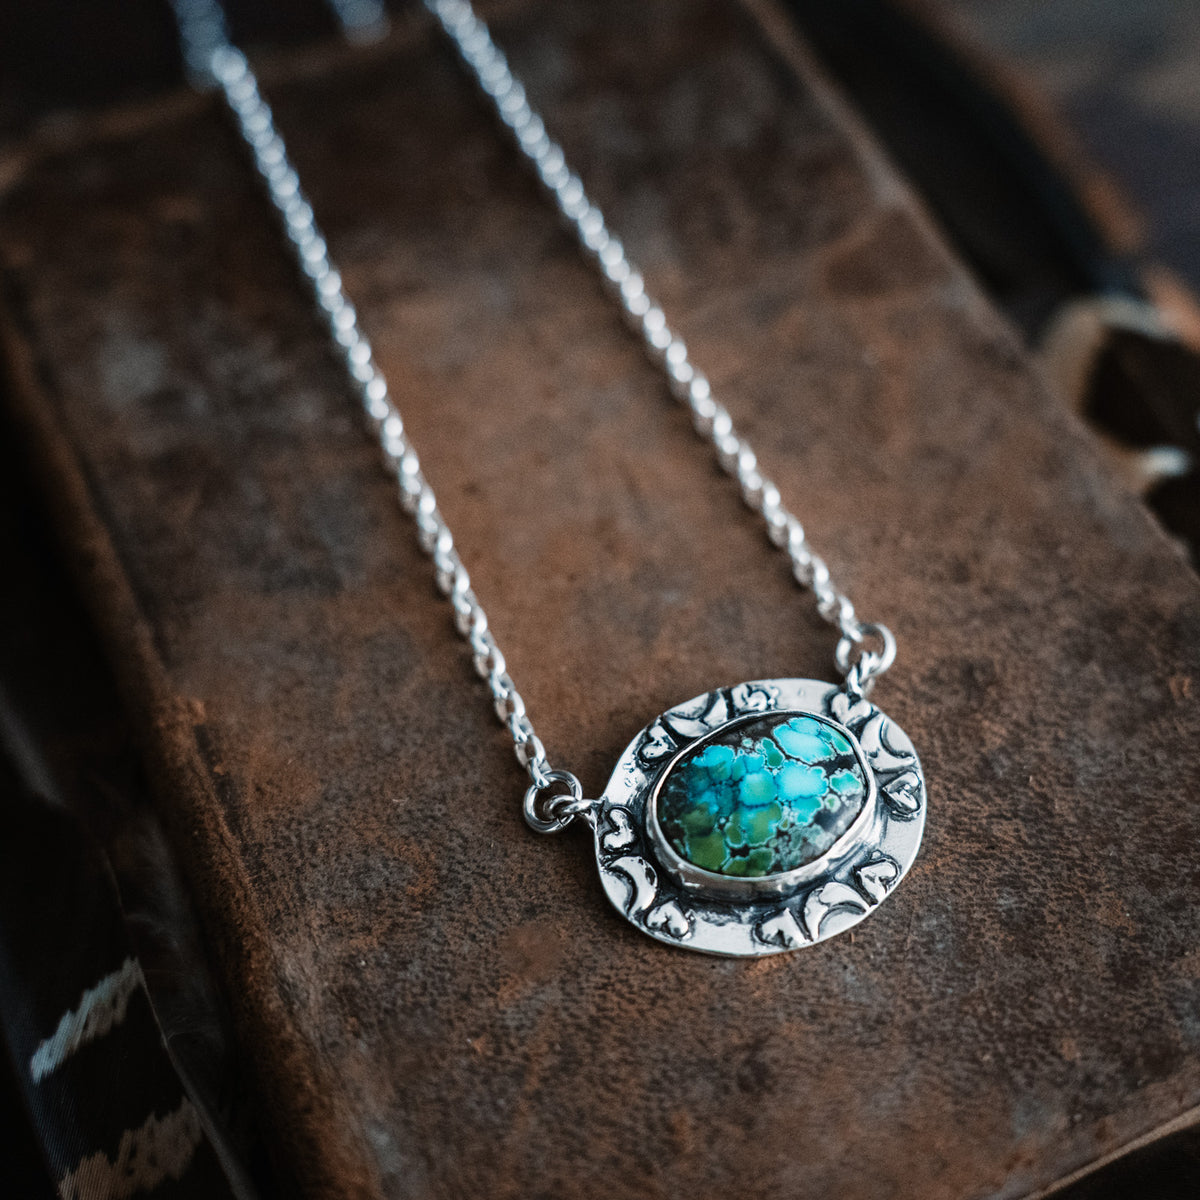 Find the Magic Turquoise Necklace